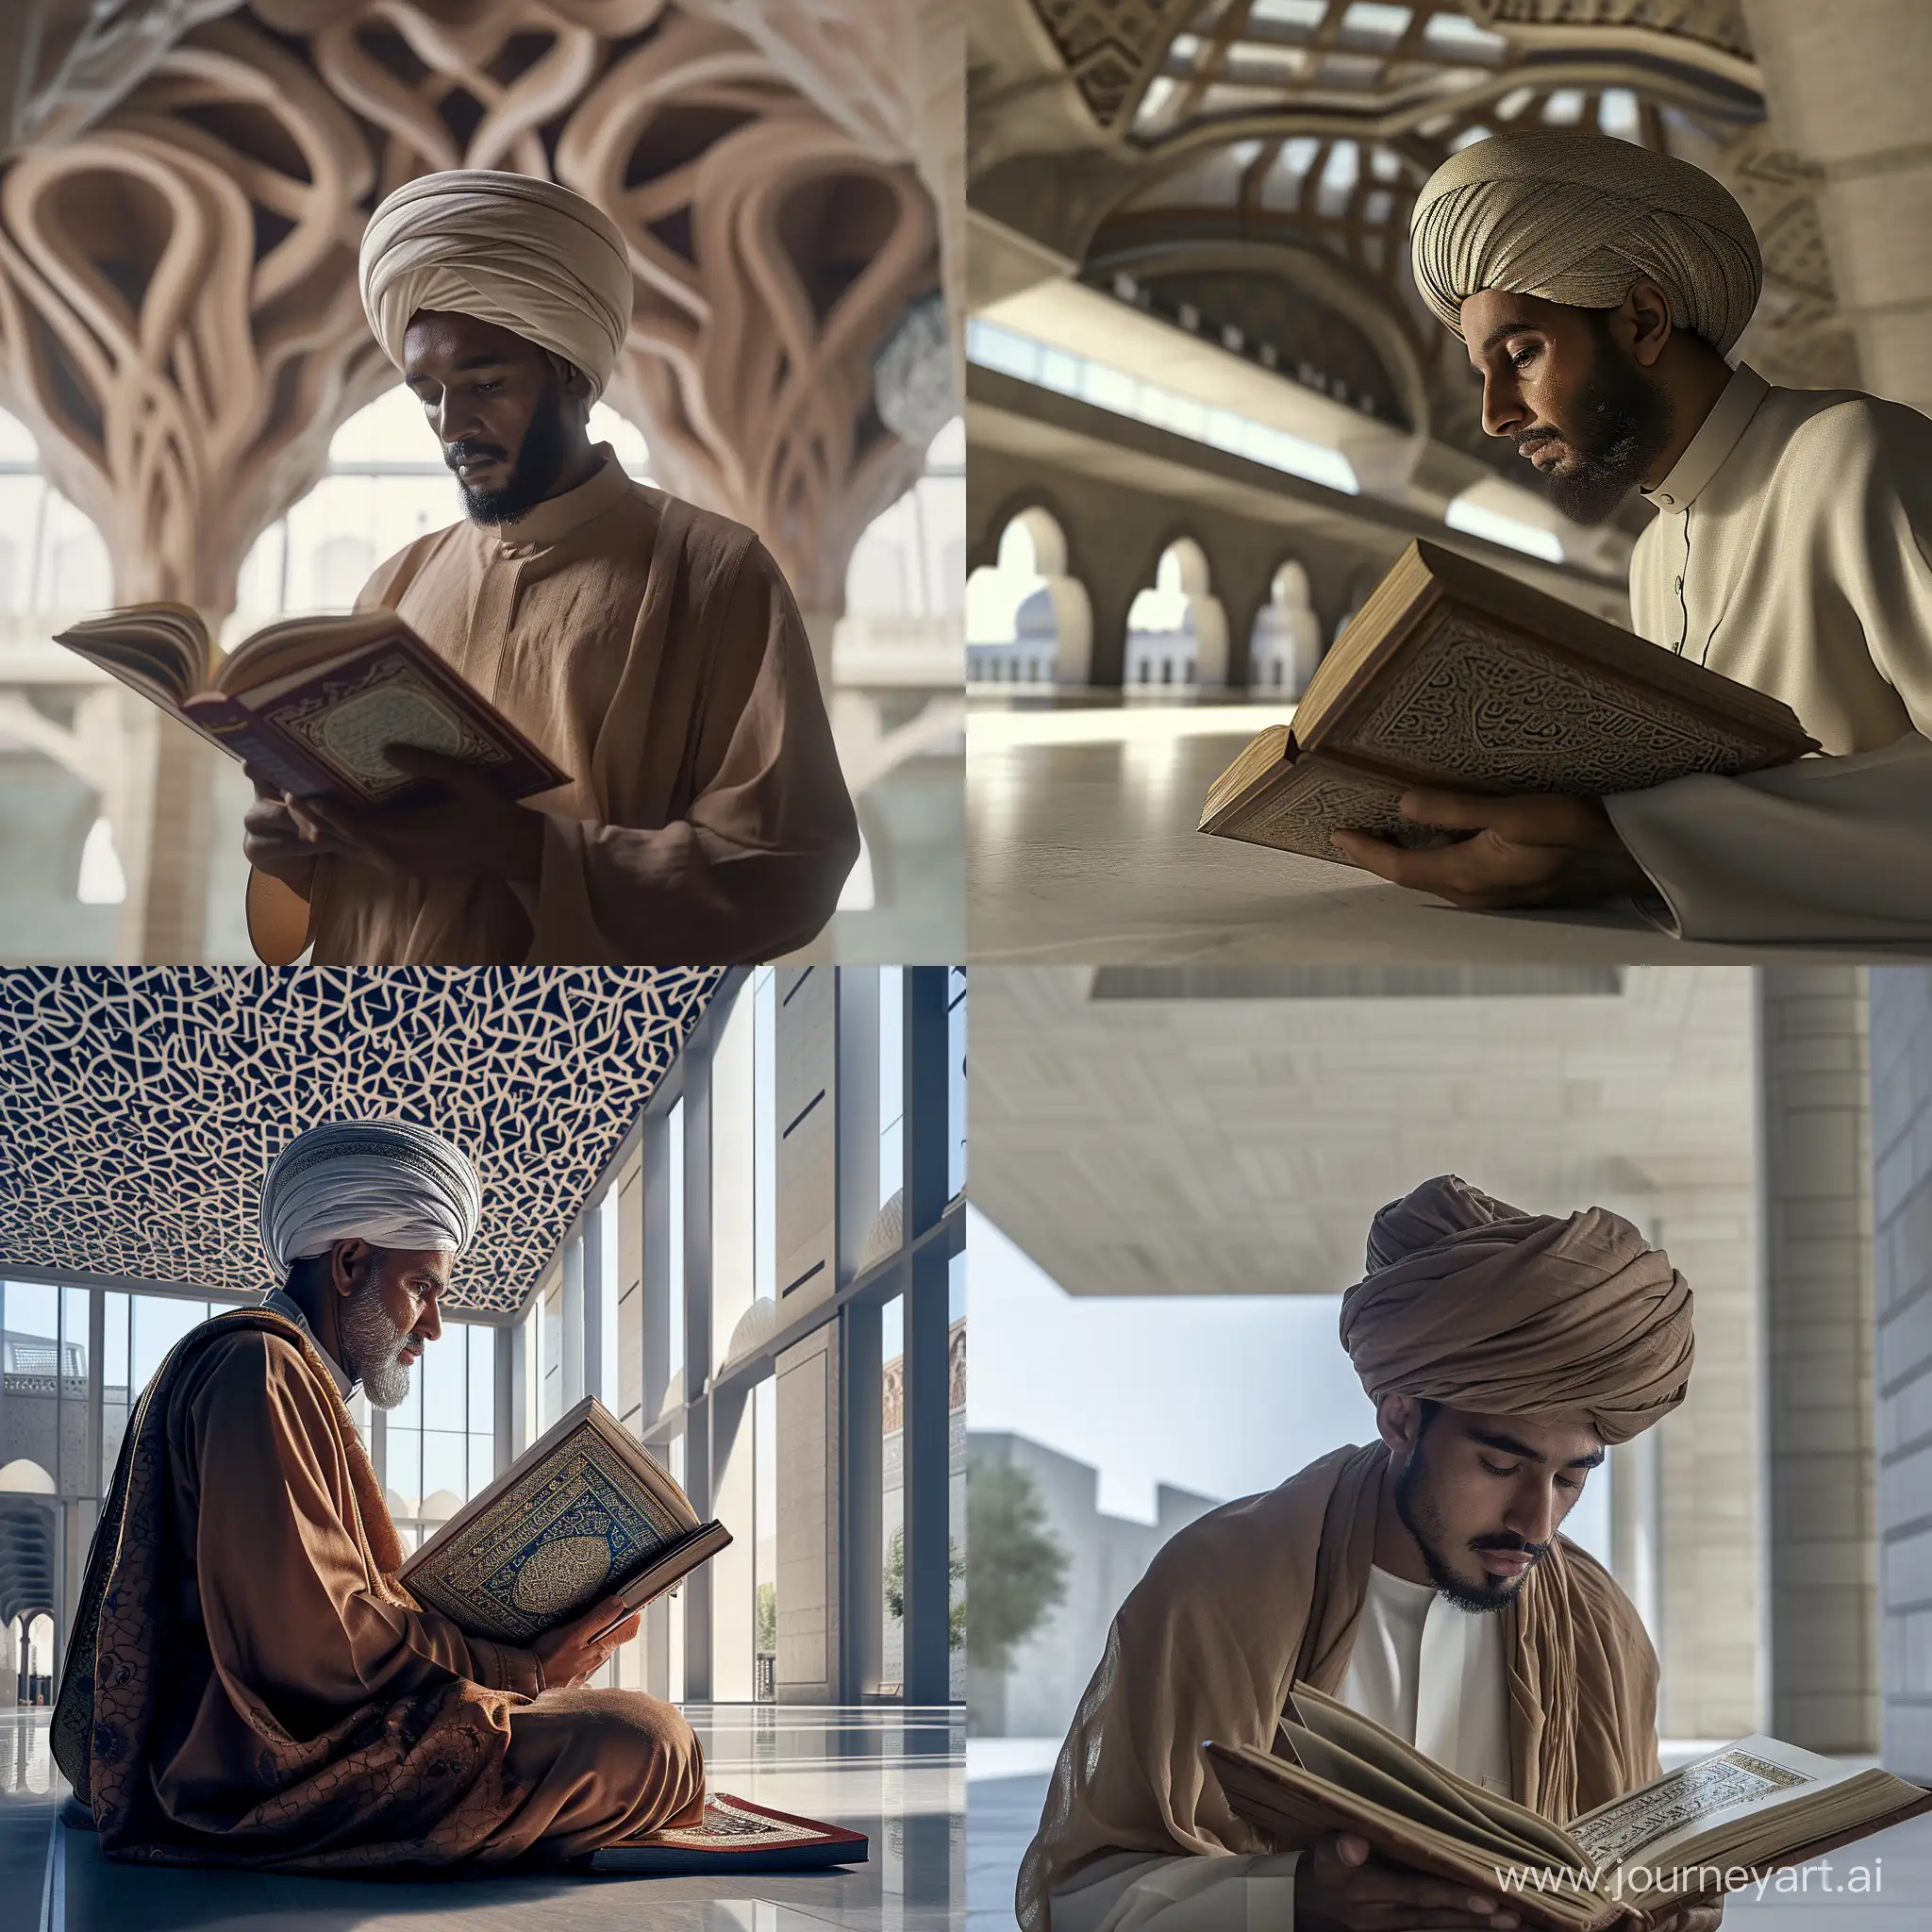 Contemplative-Reading-Man-in-Turban-with-Quran-at-Modern-Mosque